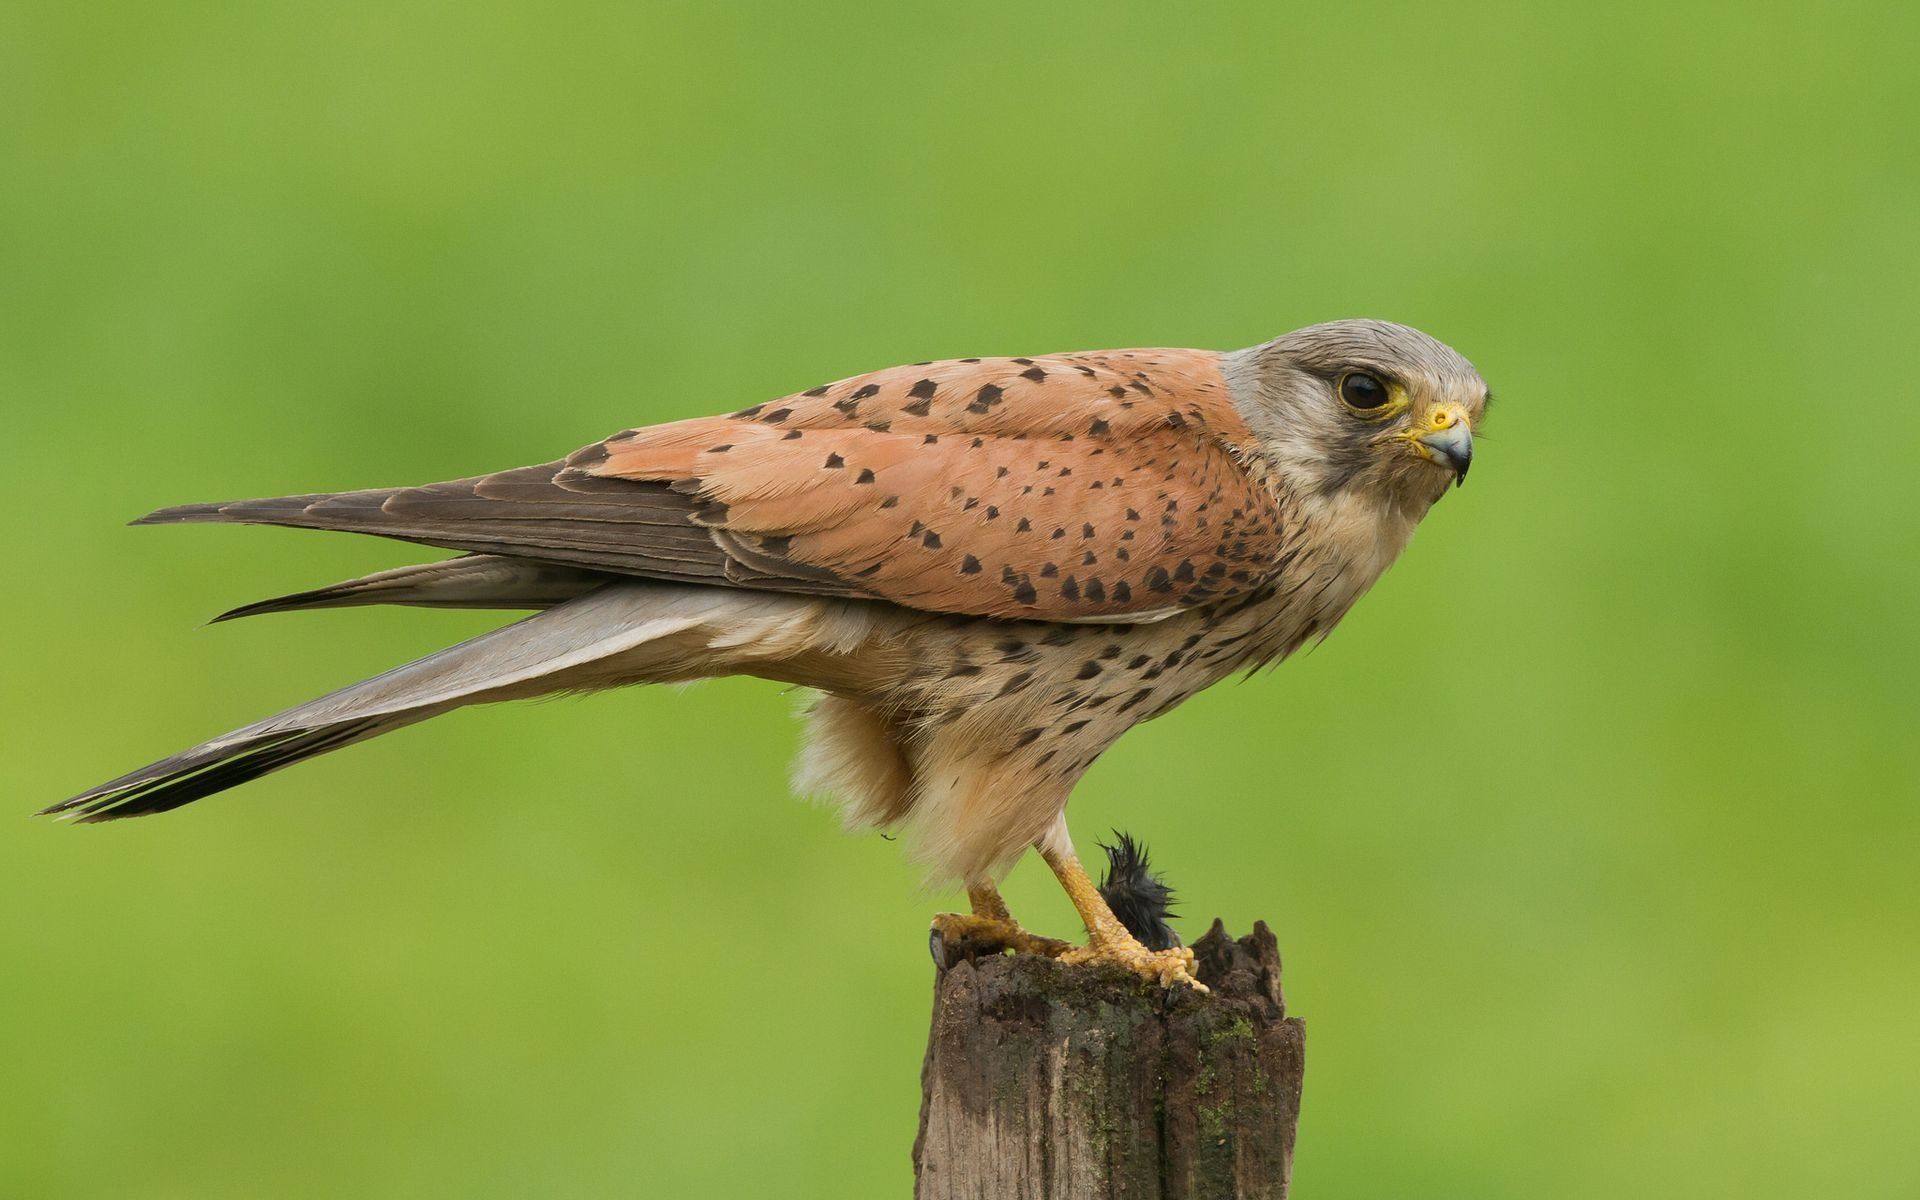 Download wallpaper bird of prey, falco tinnunculus, kestrel, europe for desktop with resolution 1920x1200. High Quality HD picture wallpaper